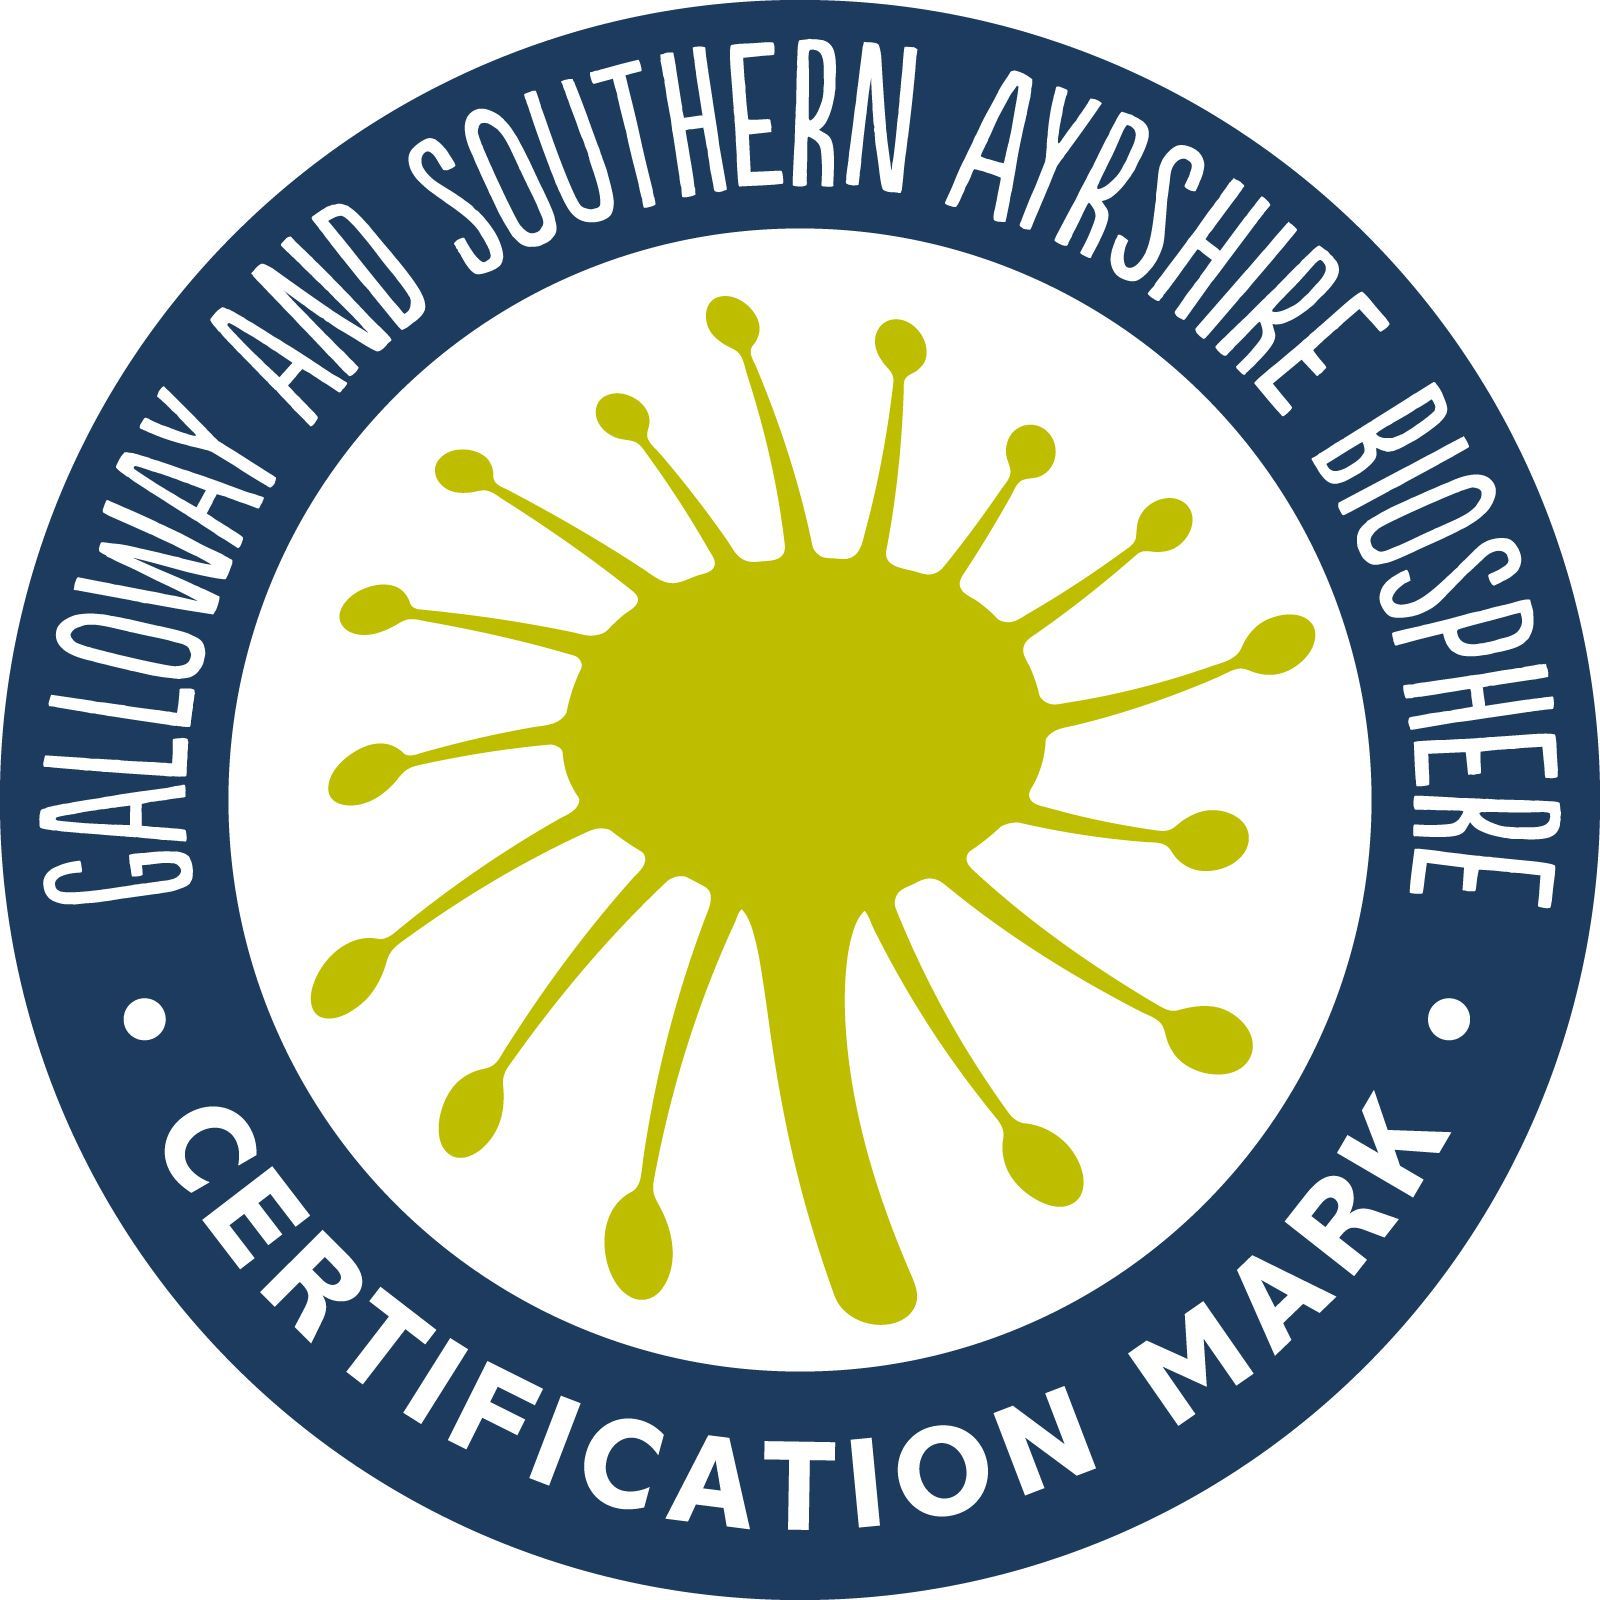 Ingrained Culture has been awarded the Certification Mark from the Galloway and Southern Ayrshire Biosphere logo.